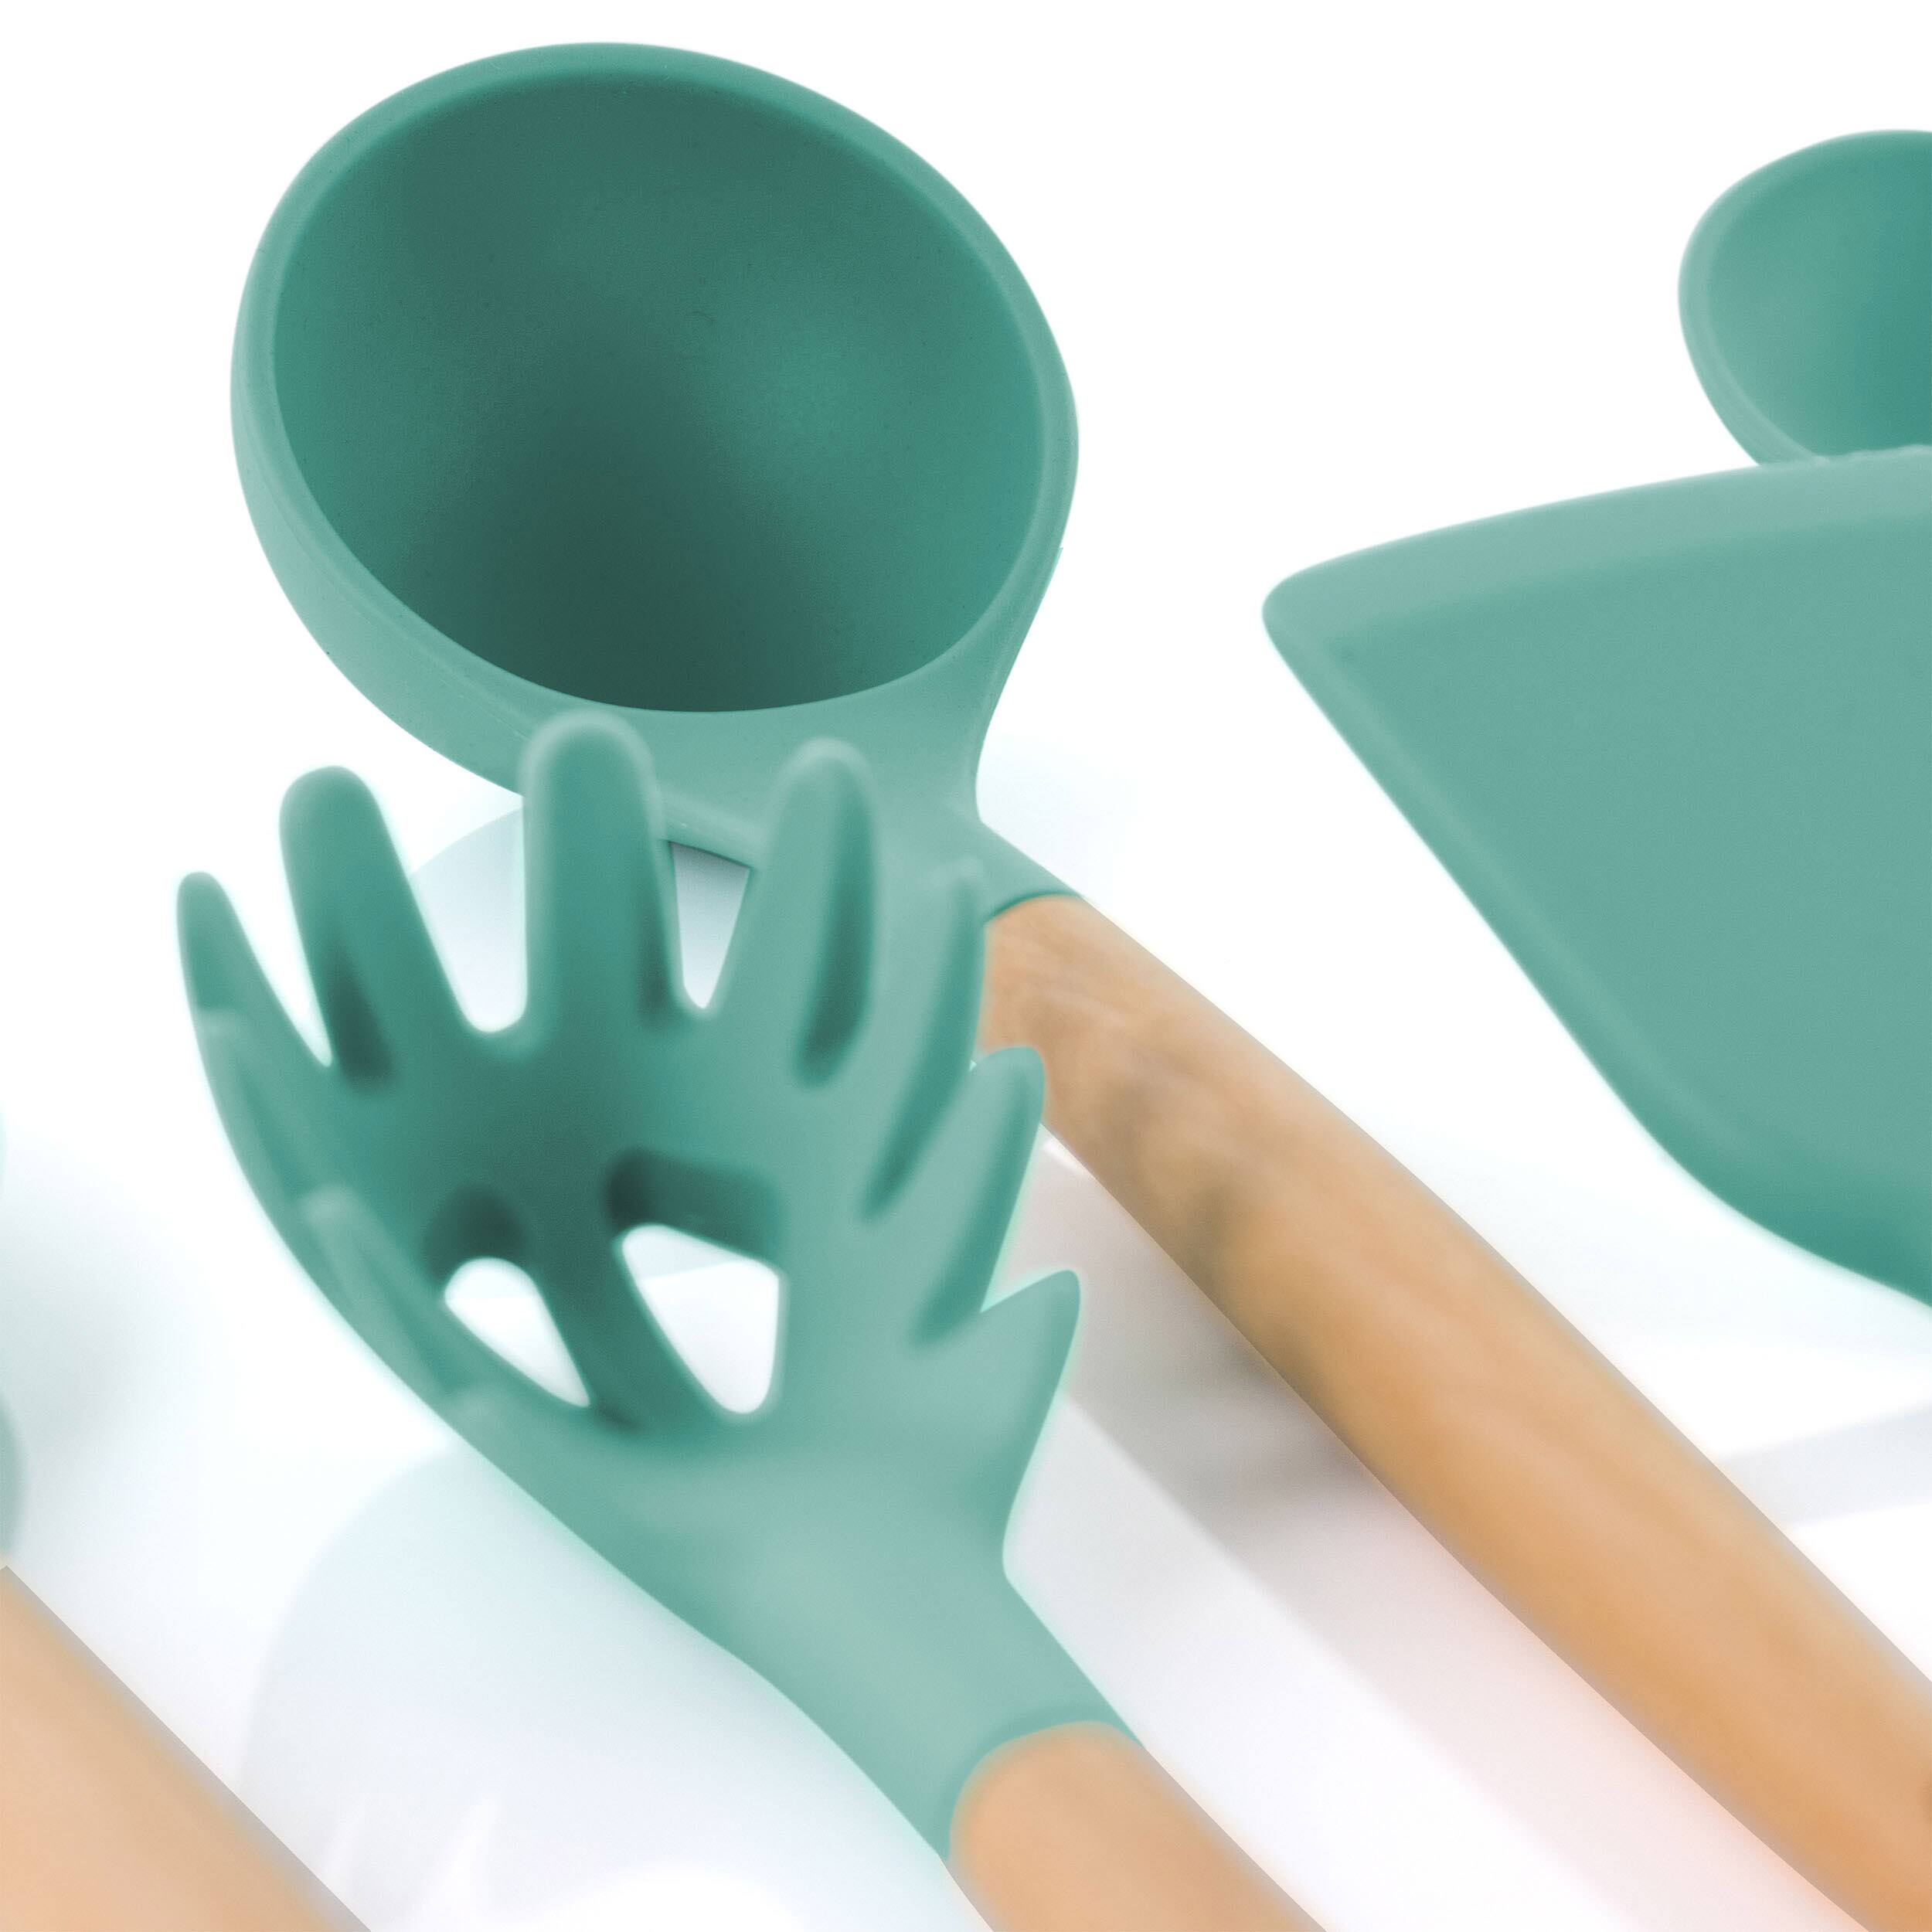 MegaChef Mint Green Silicone and Wood Cooking Utensils (Set of 12)